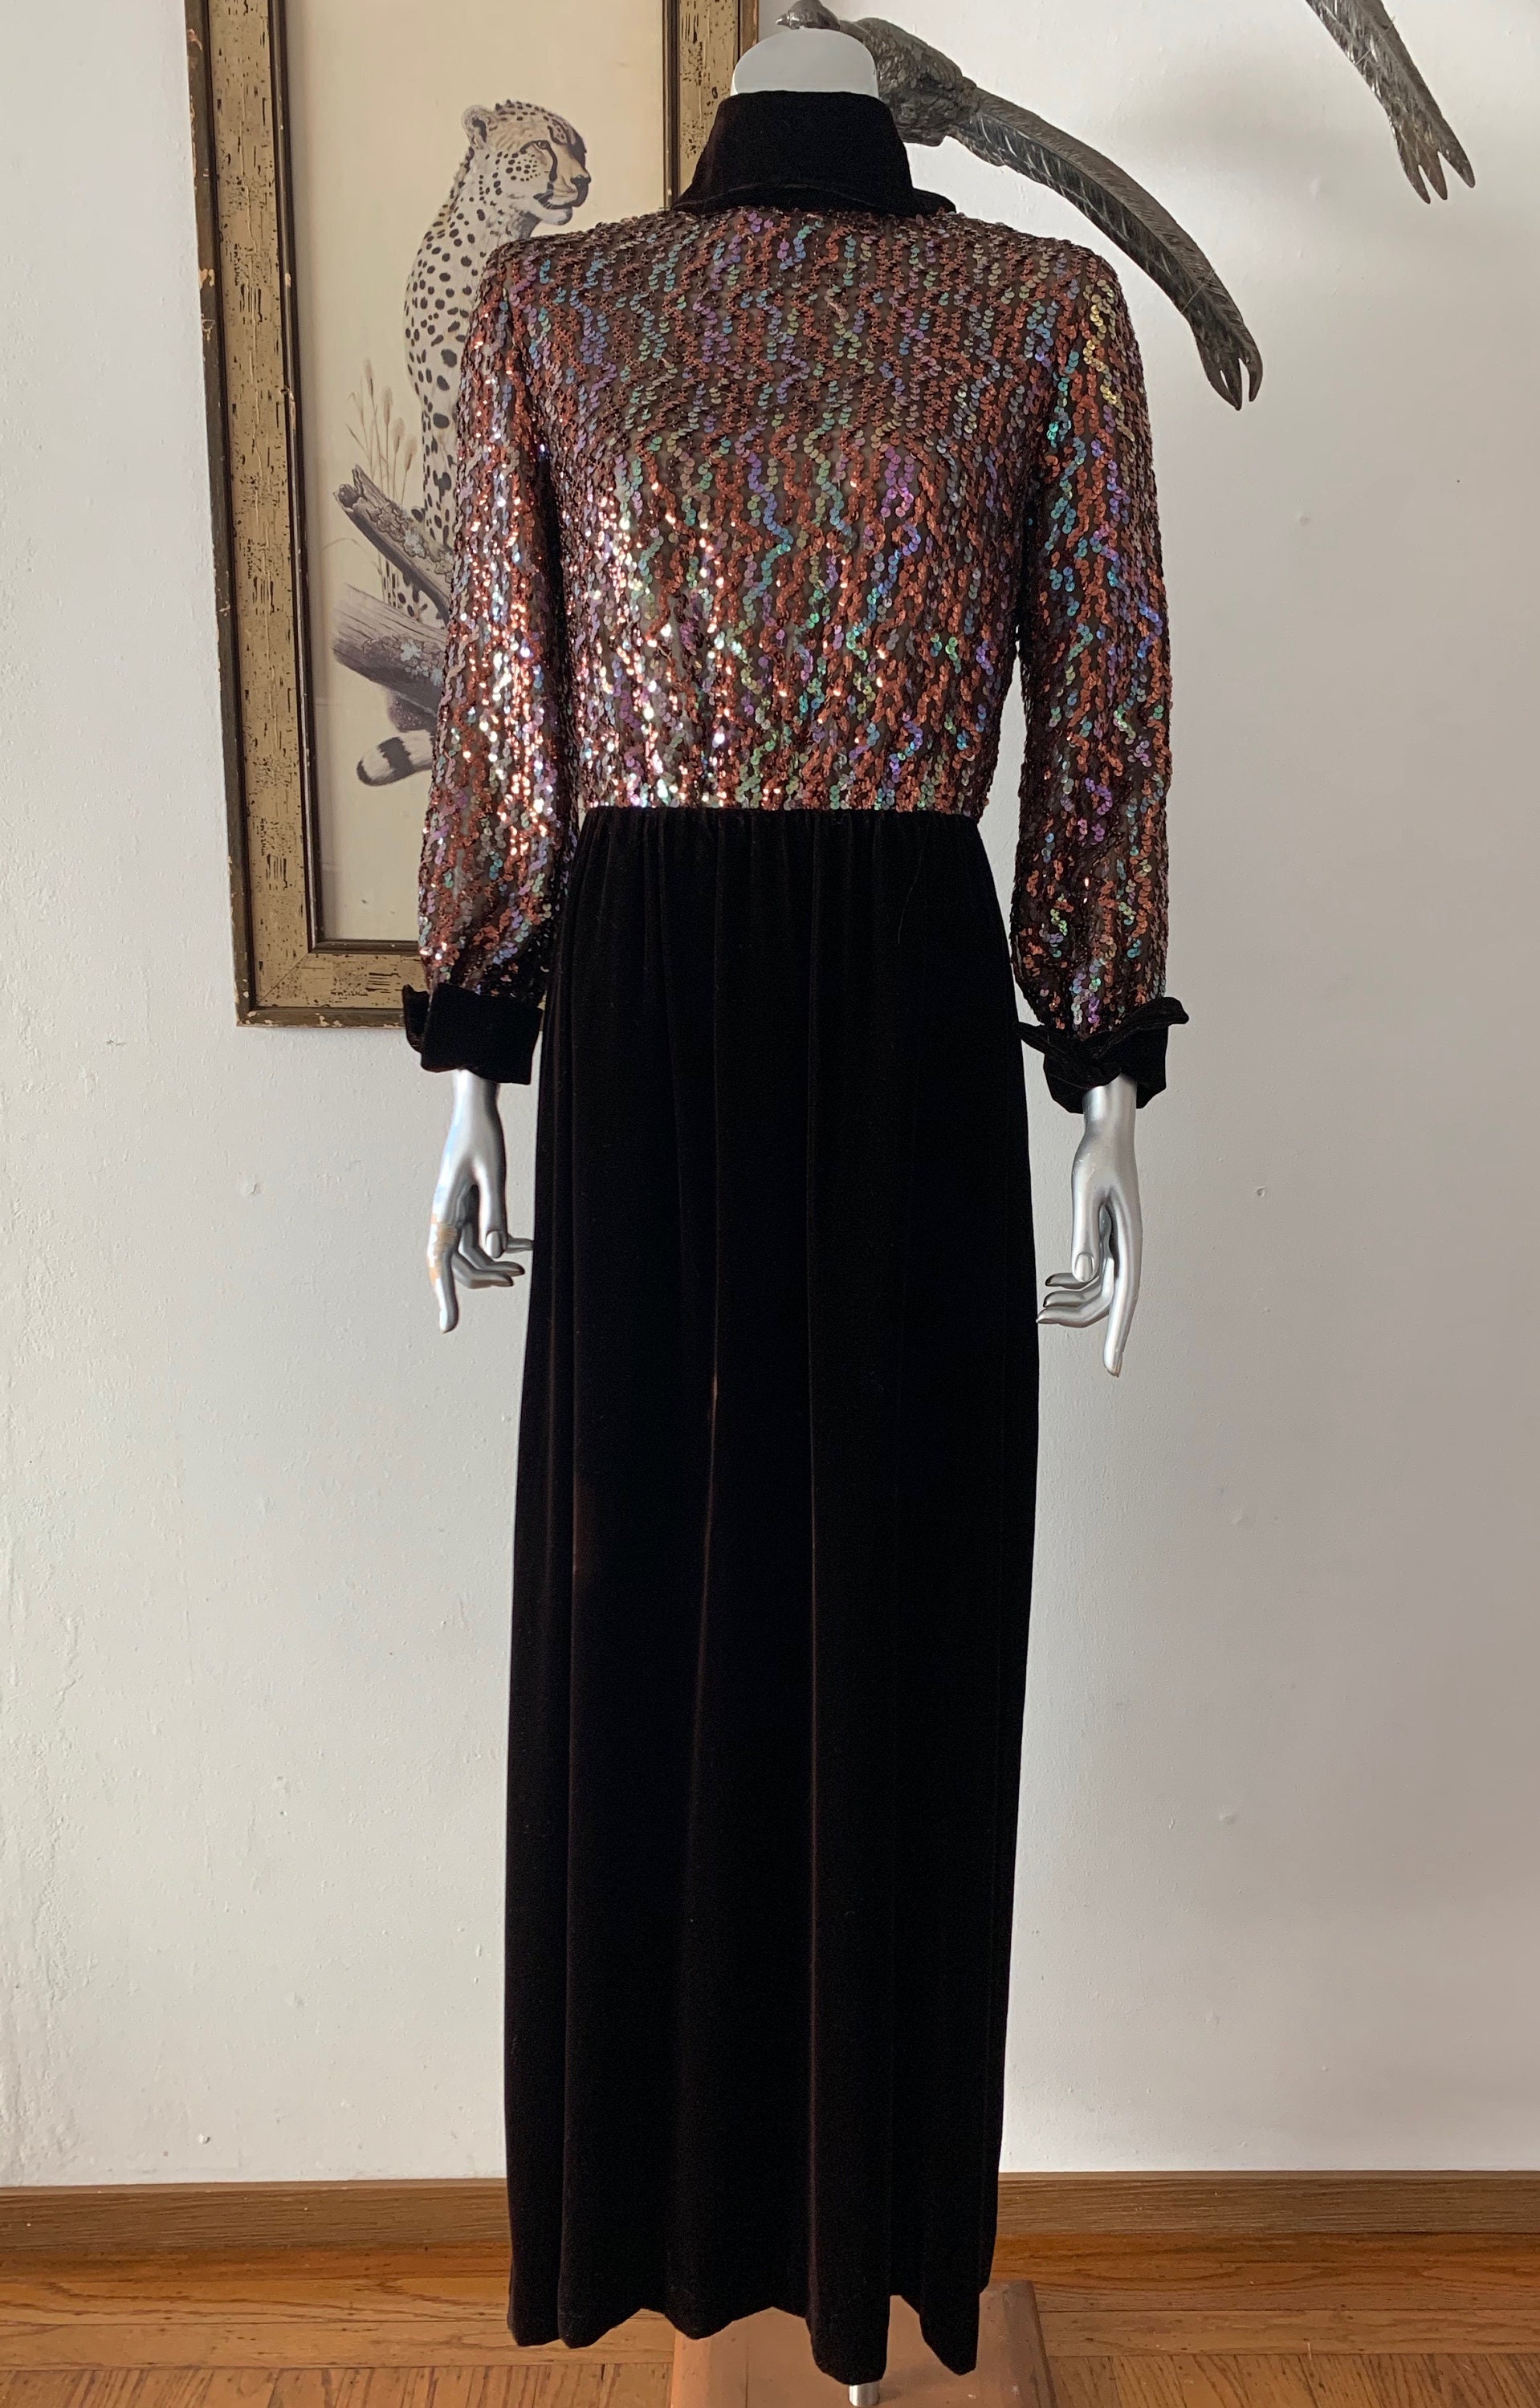 Fabulous 70s Evening Gown in Velvet and Sequins - Etsy